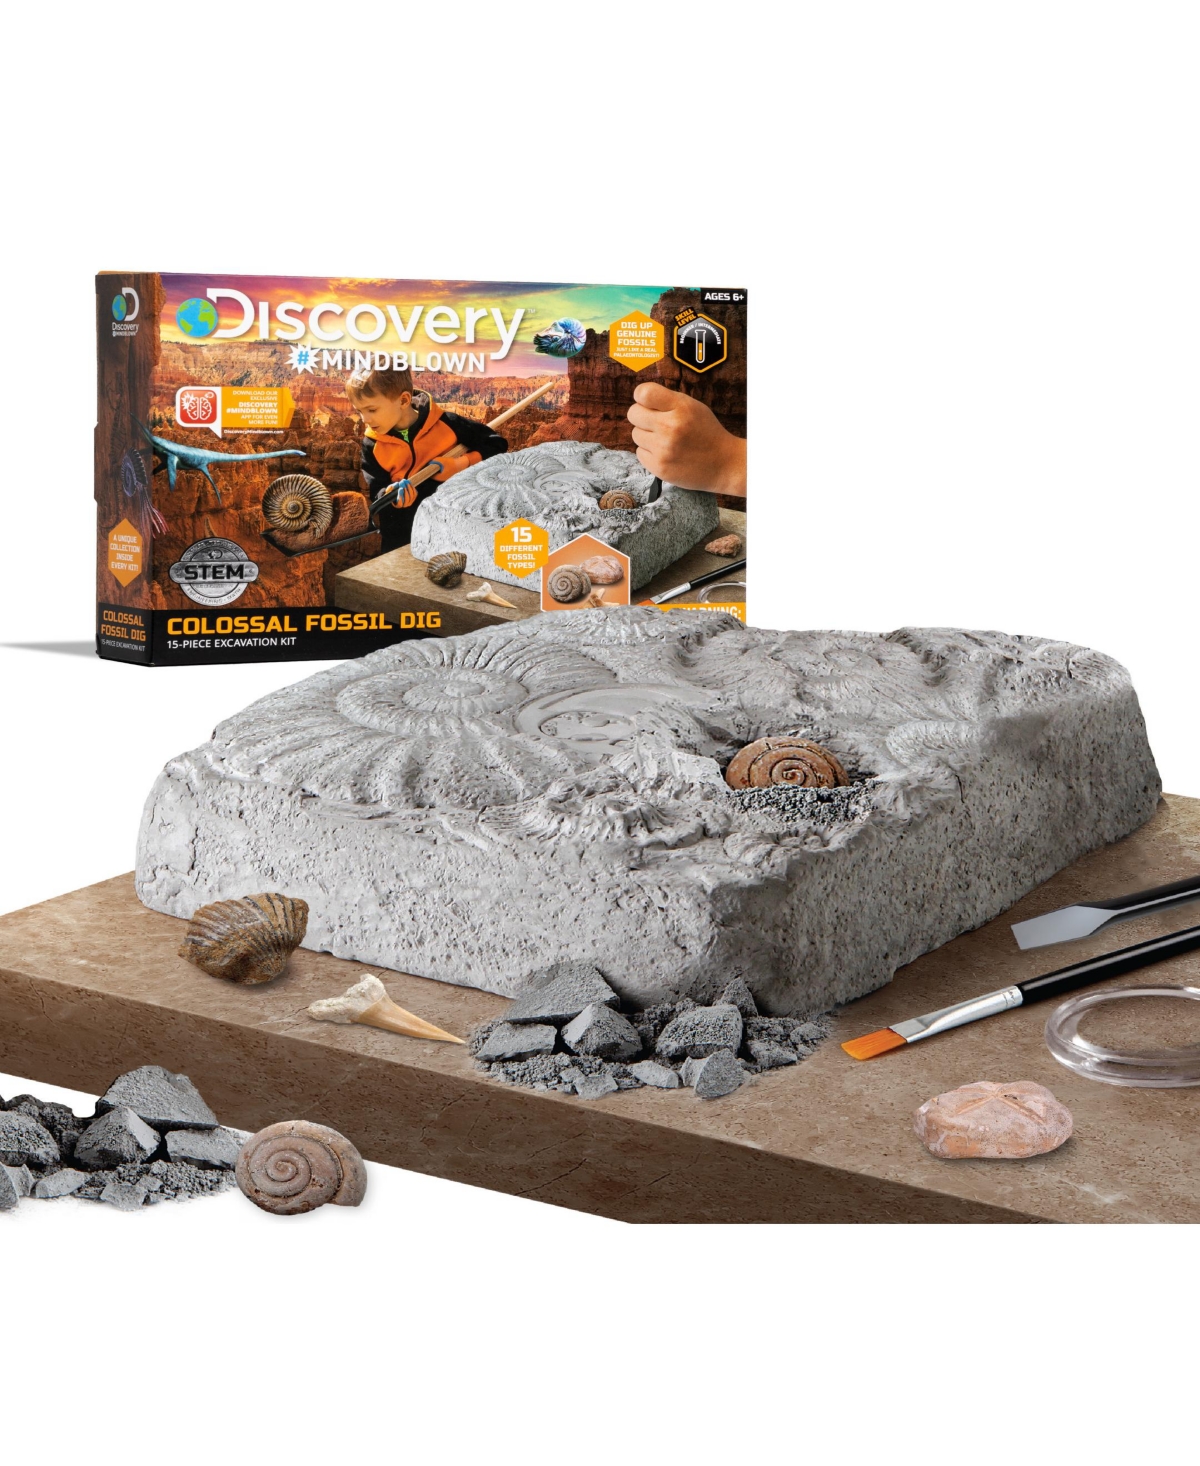 Discovery Mindblown Kids' Colossalfossil Dig Set, 15-piece Archeology Excavation Kit In Grey